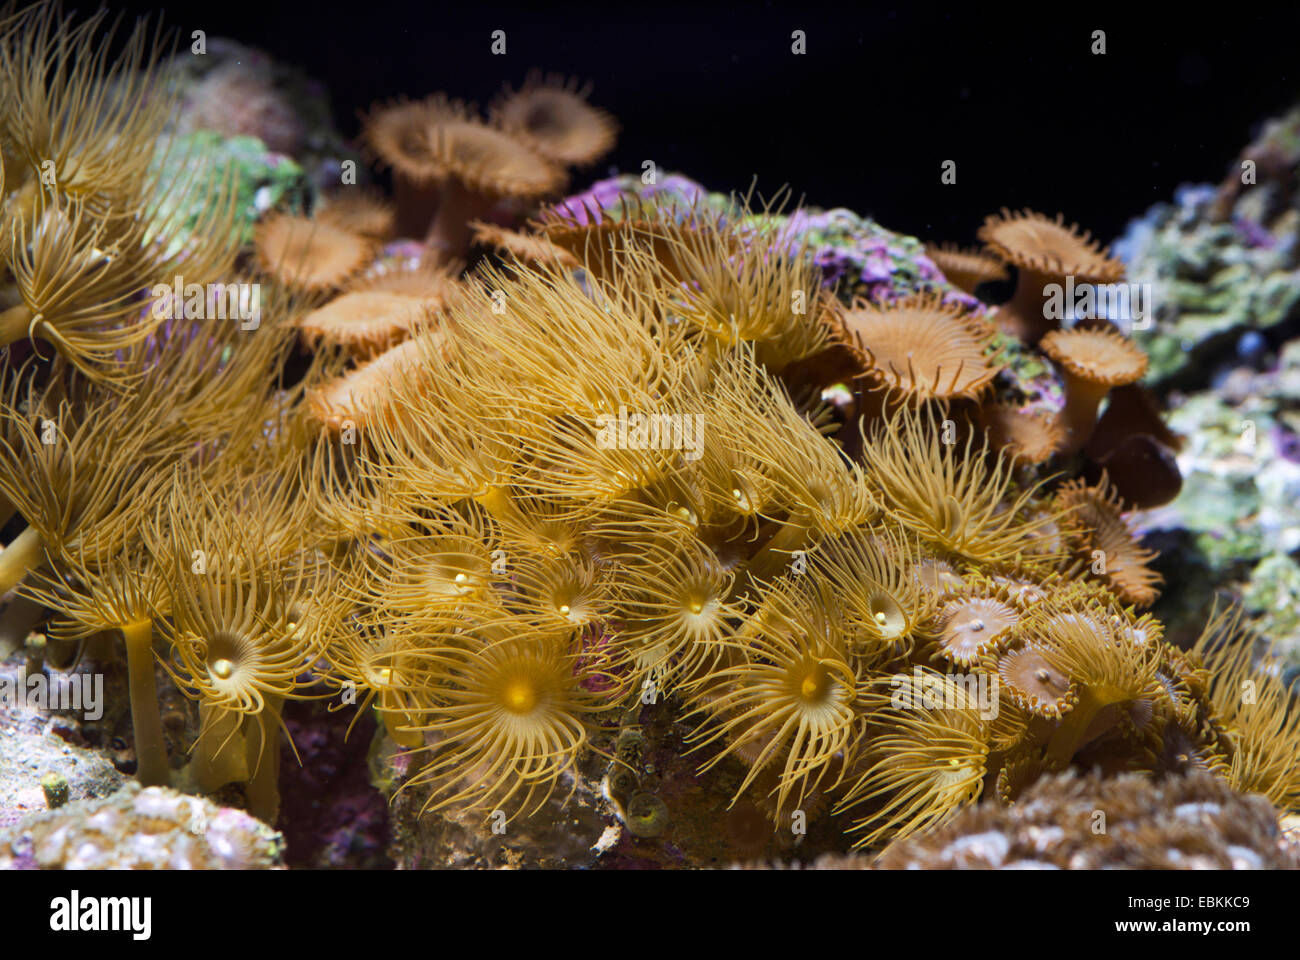 yellow commensal zoanthid, yellow encrusting sea anemone (Parazoanthus axinellae), colony Stock Photo